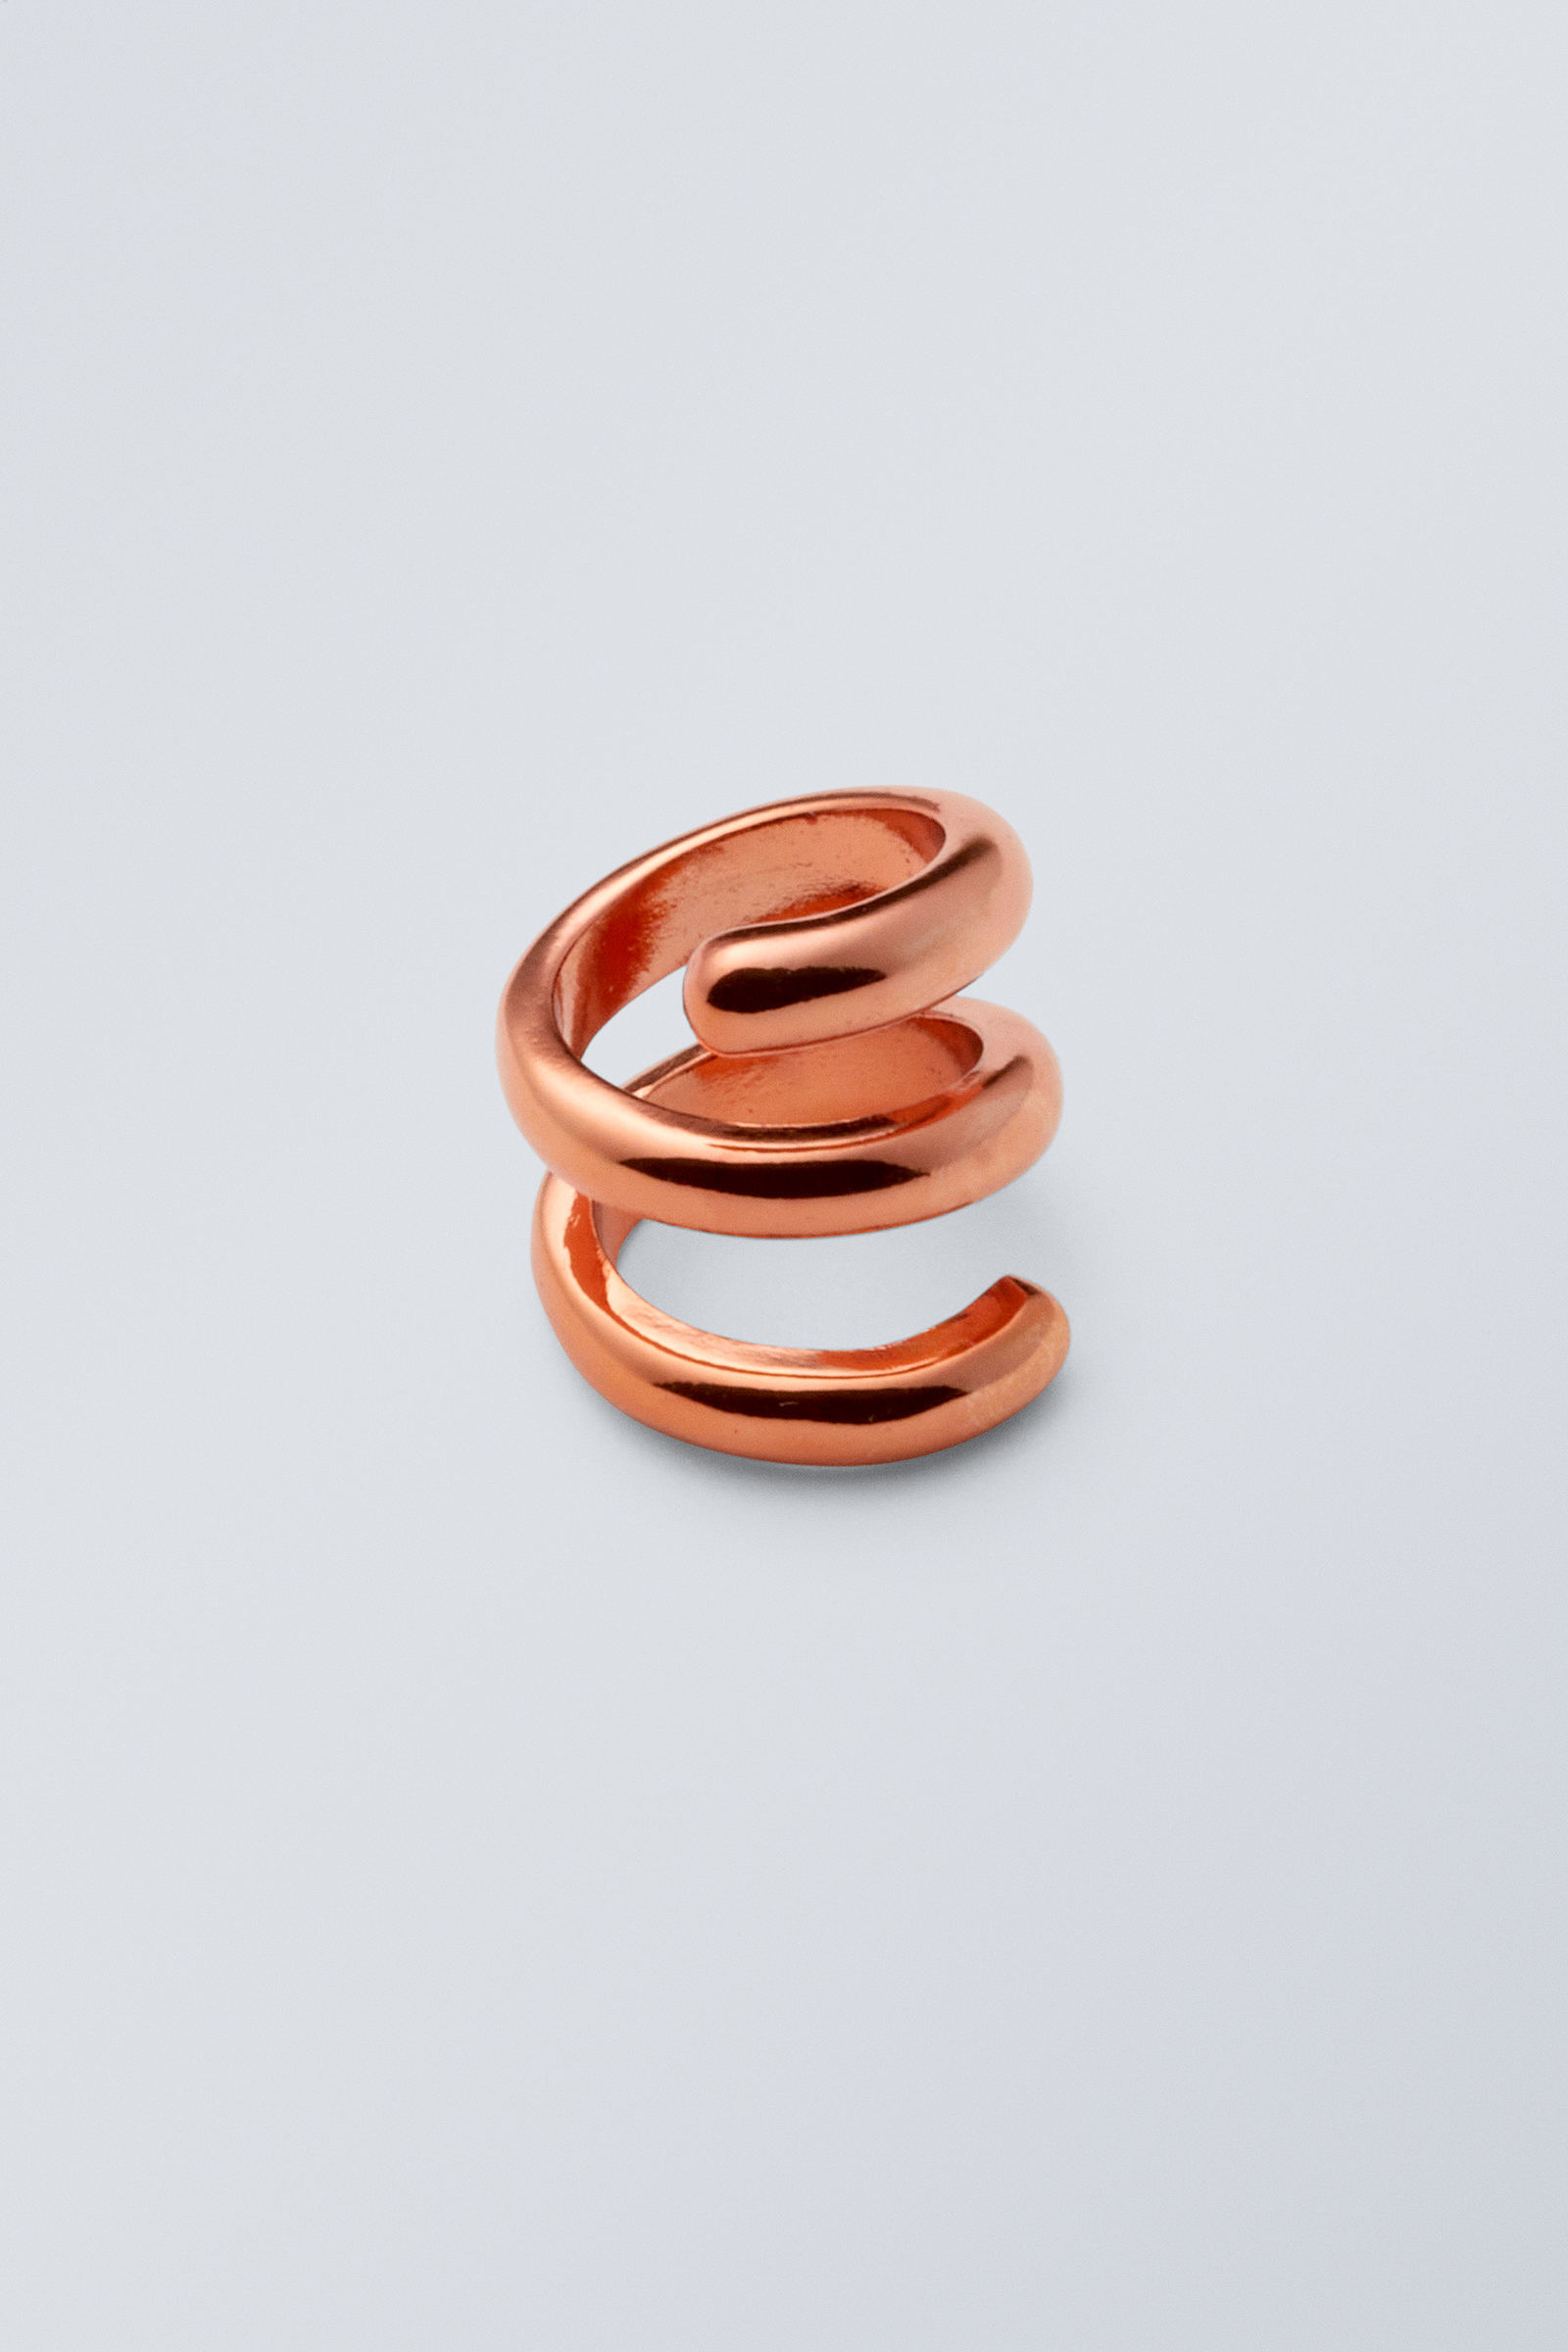 Buy VIDEH Simple Plain Snake Copper Ring for Men and Women (SIMPLE SNAKE  RING PK 4) at Amazon.in